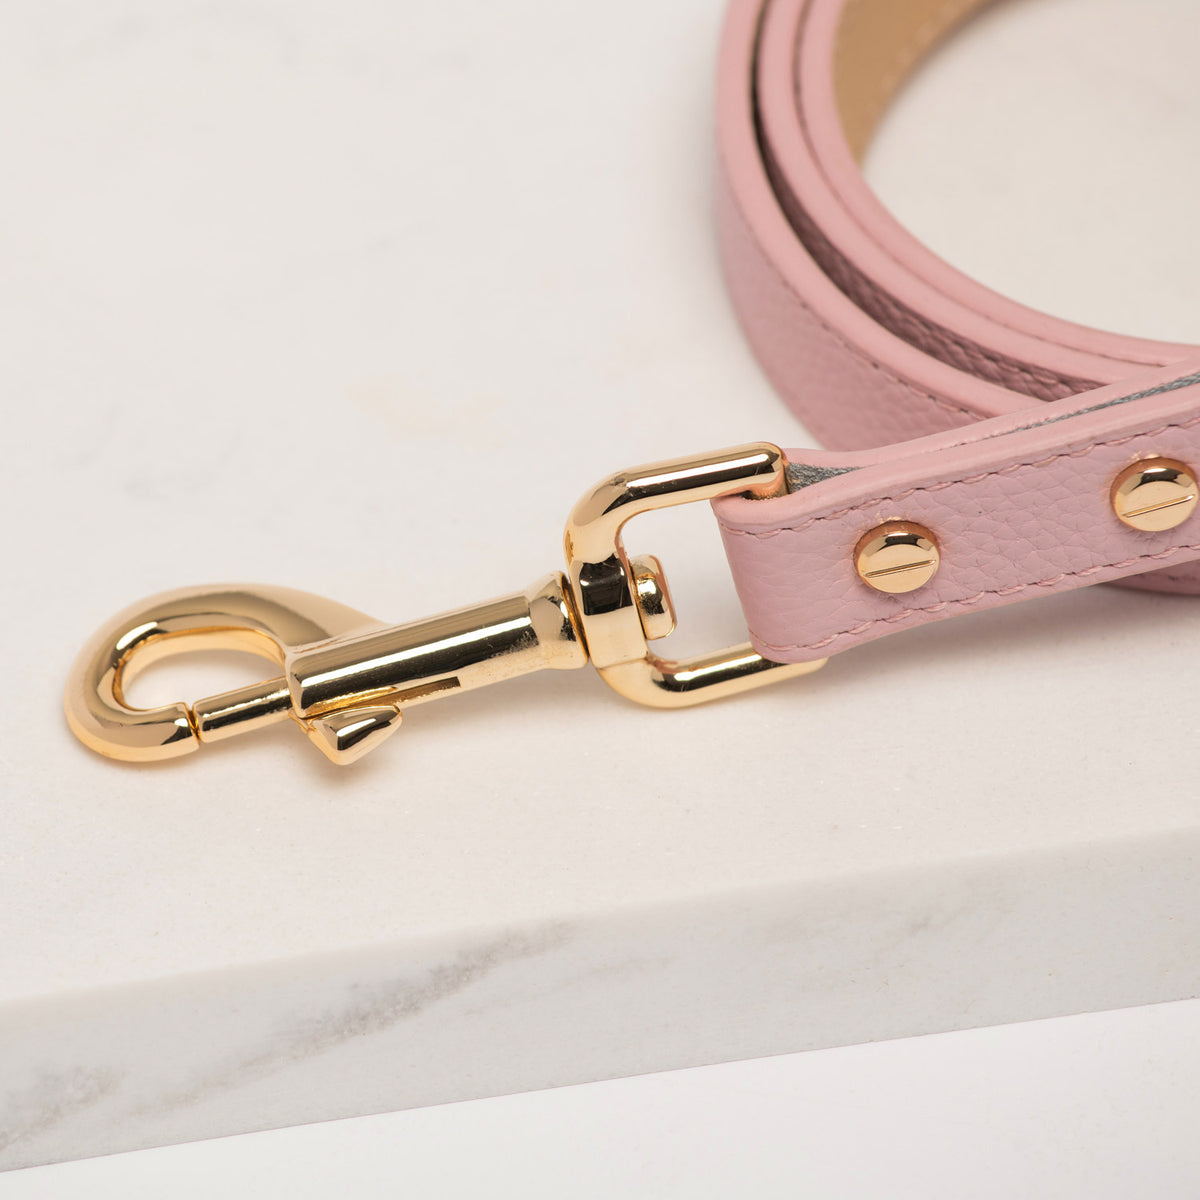 Rufus & Coco's Berlin Rose leather dog lead is made from quality leather. Each lead is finished with premium gold hardware and studs for style and durability. Suitable for dogs of all sizes, this 100% leather dog lead is 120cm long.